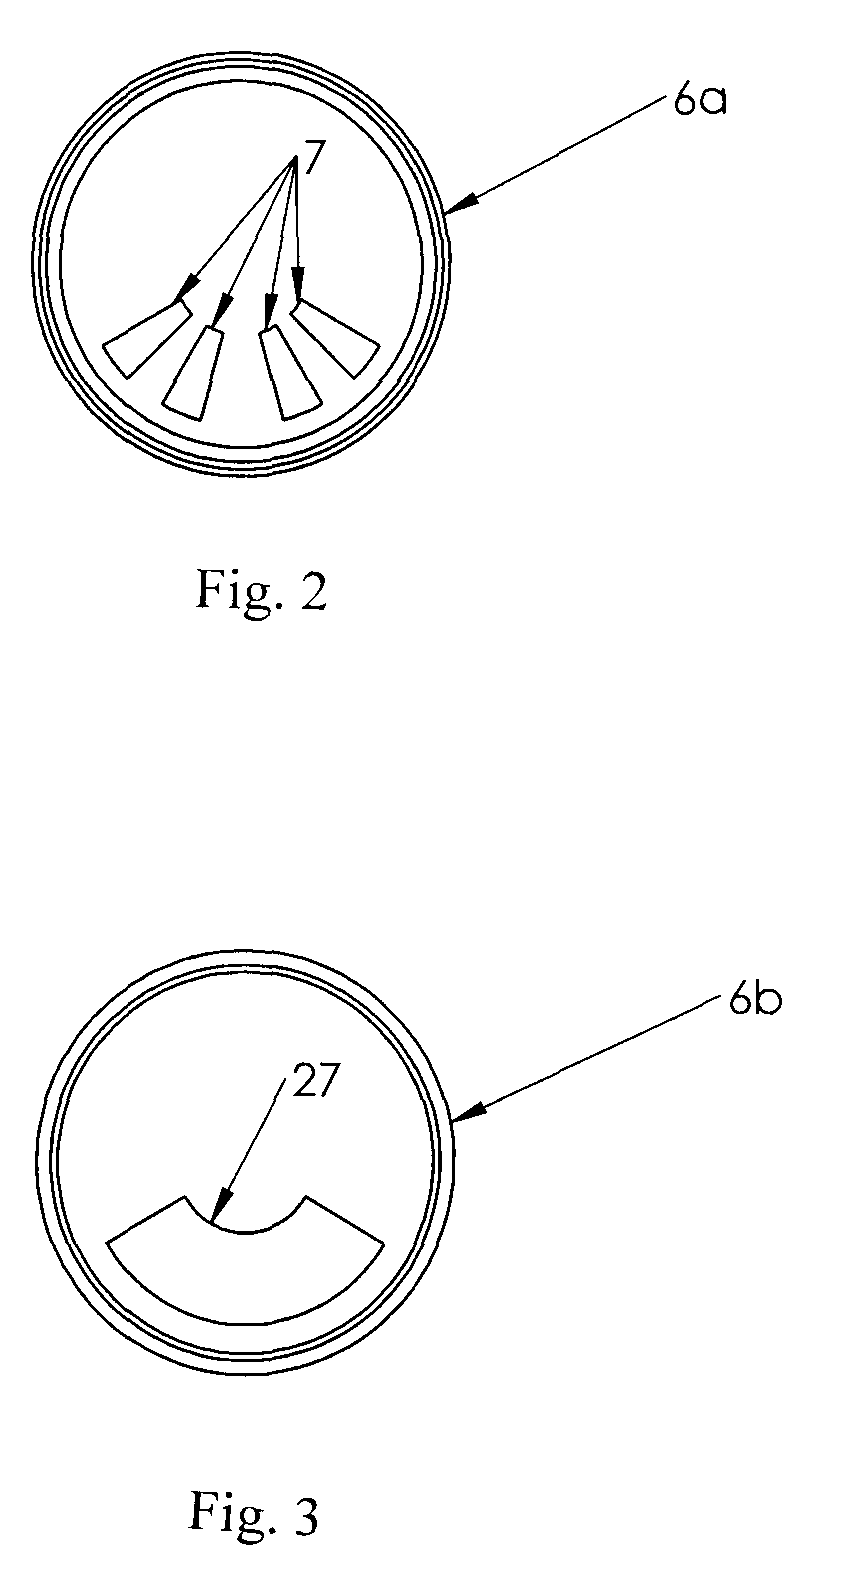 Apparatus and method for delivering beneficial liquids at steady rate